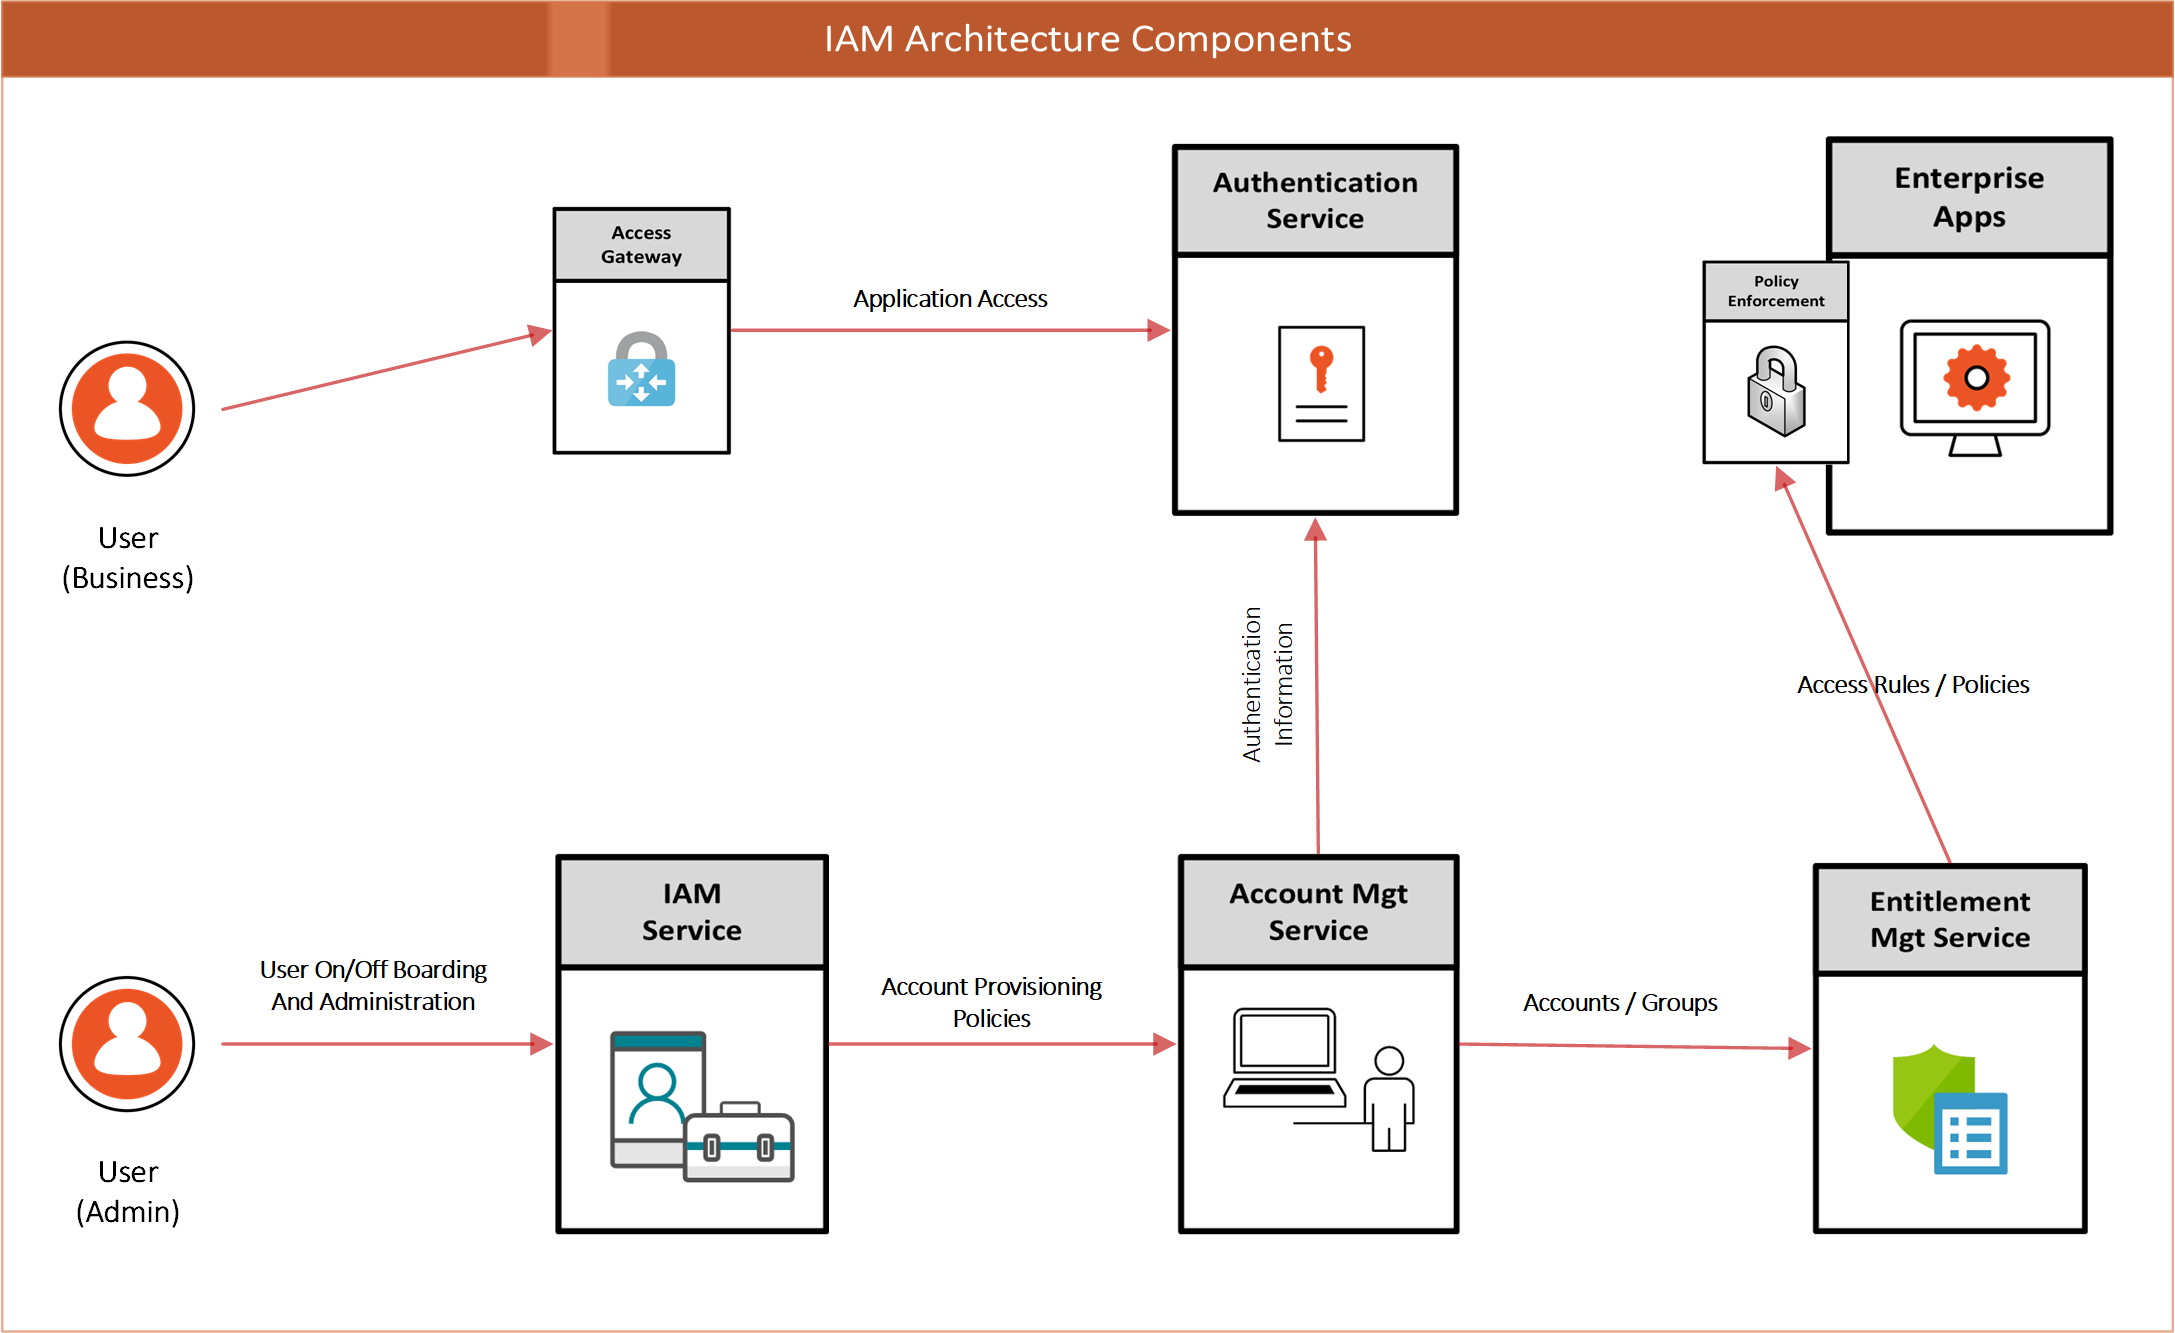 A diagram of IAM architecture components, including the end user who goes through an Access Gateway to the Authentication Services. There is also the administrative user who handles end-user on and off-boarding and administration through the IA service, Account Management Services Entitlement Management Service, and the Enterprise Applications